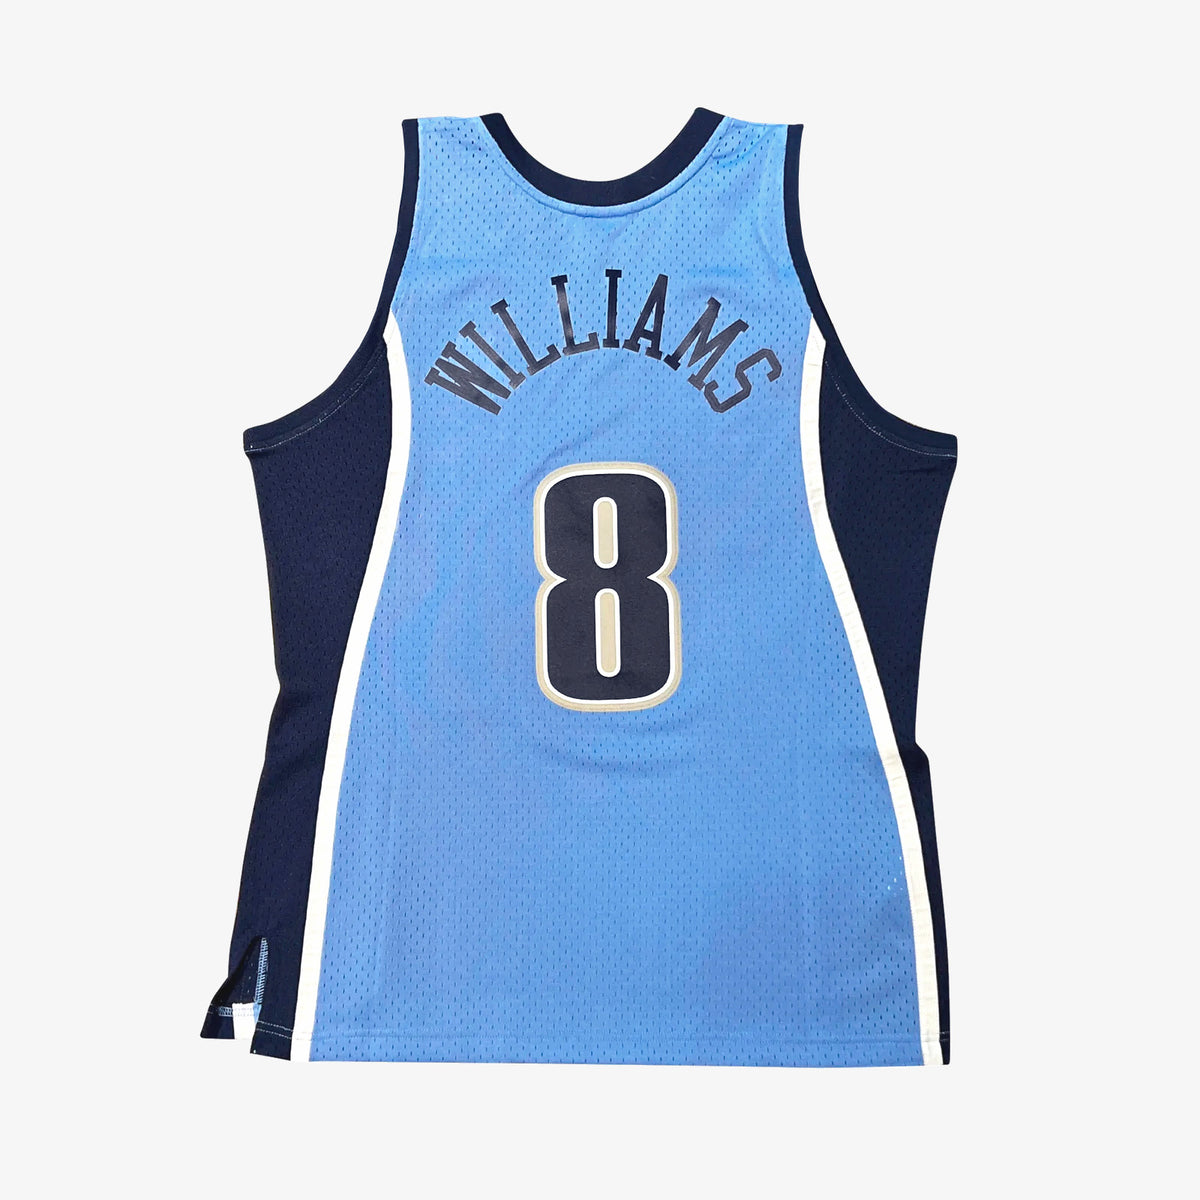 Mens 23 Basketball Jersey Embroidered Design Sleeveless Stretchy For  Optimal Performance Available In Sizes S Xxxl, Find Great Deals Now